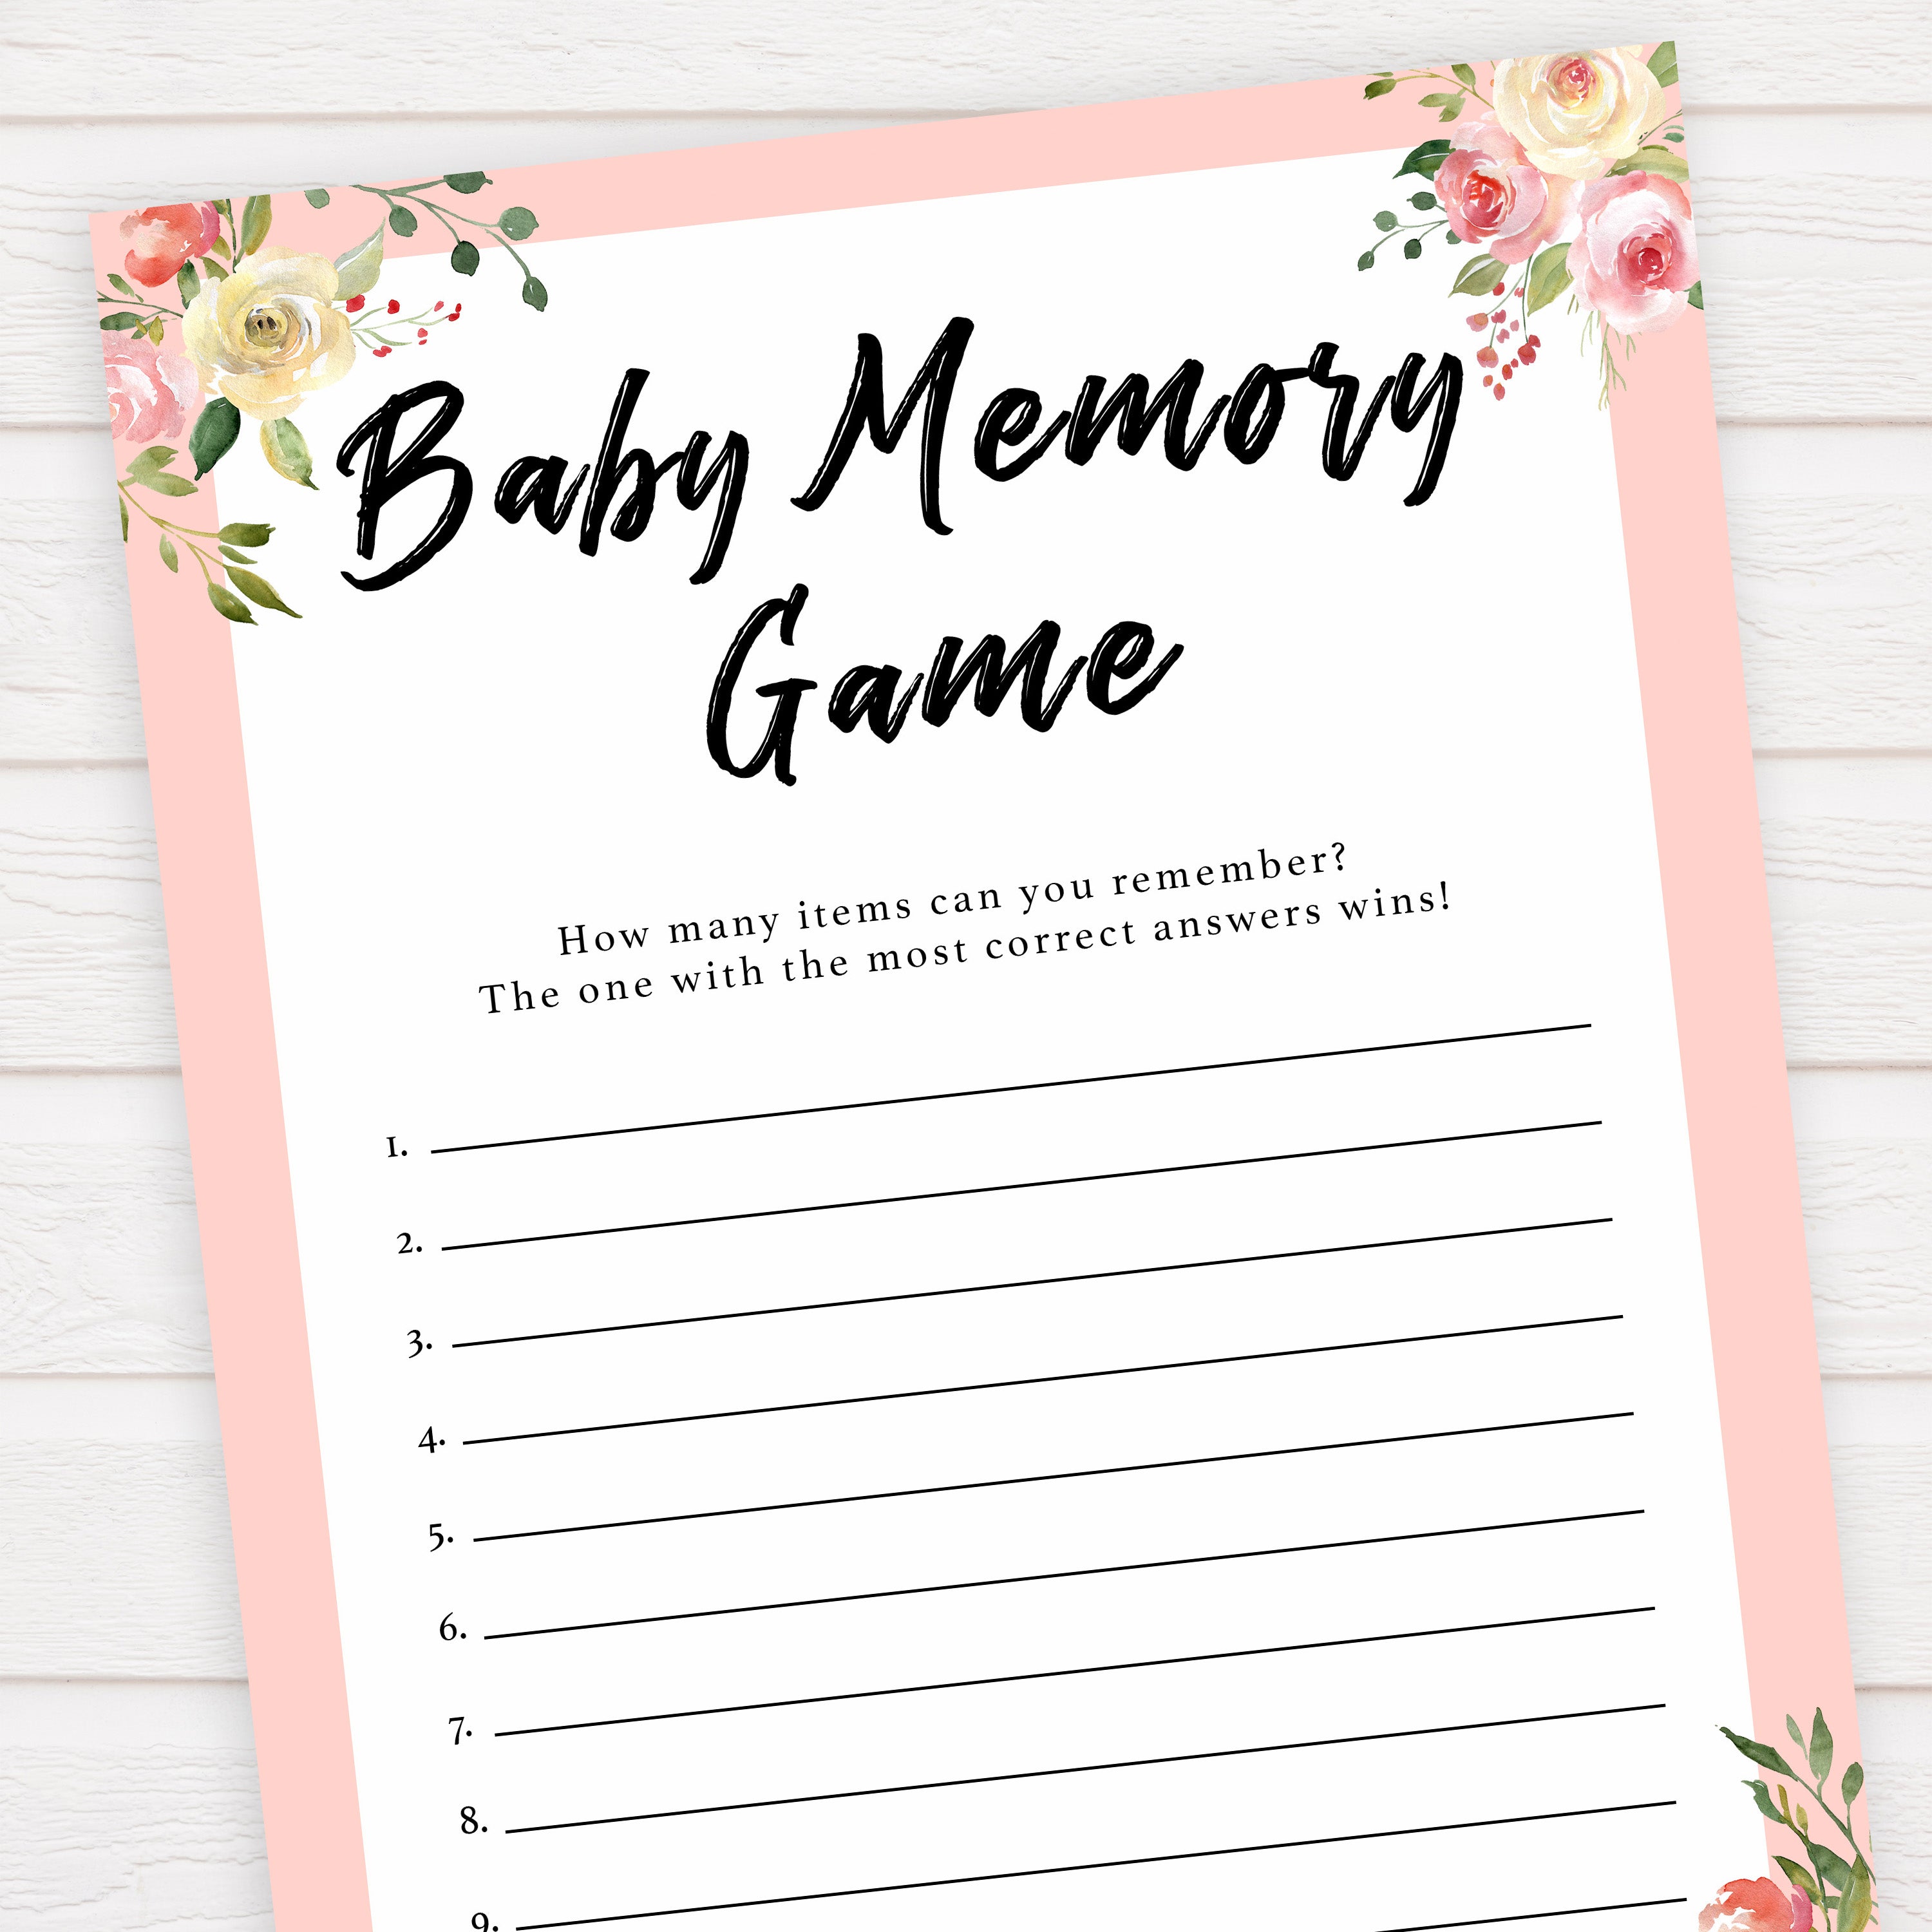 spring floral Baby memory game baby shower games, printable baby shower games, fun baby shower games, baby shower games, popular baby shower games